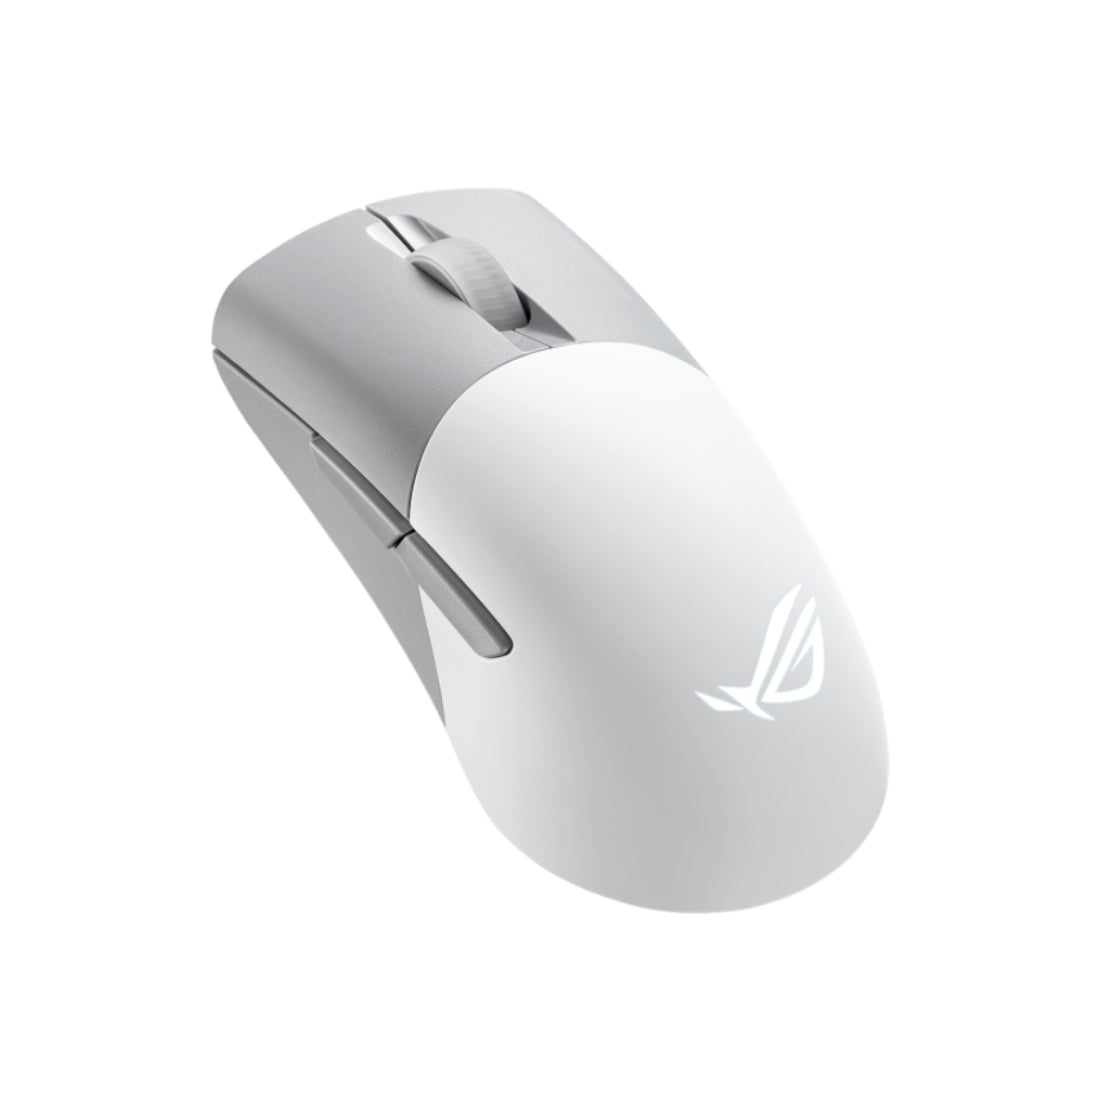 Asus ROG Keris AimPoint Wireless Gaming Mouse - White - فأرة - Store 974 | ستور ٩٧٤